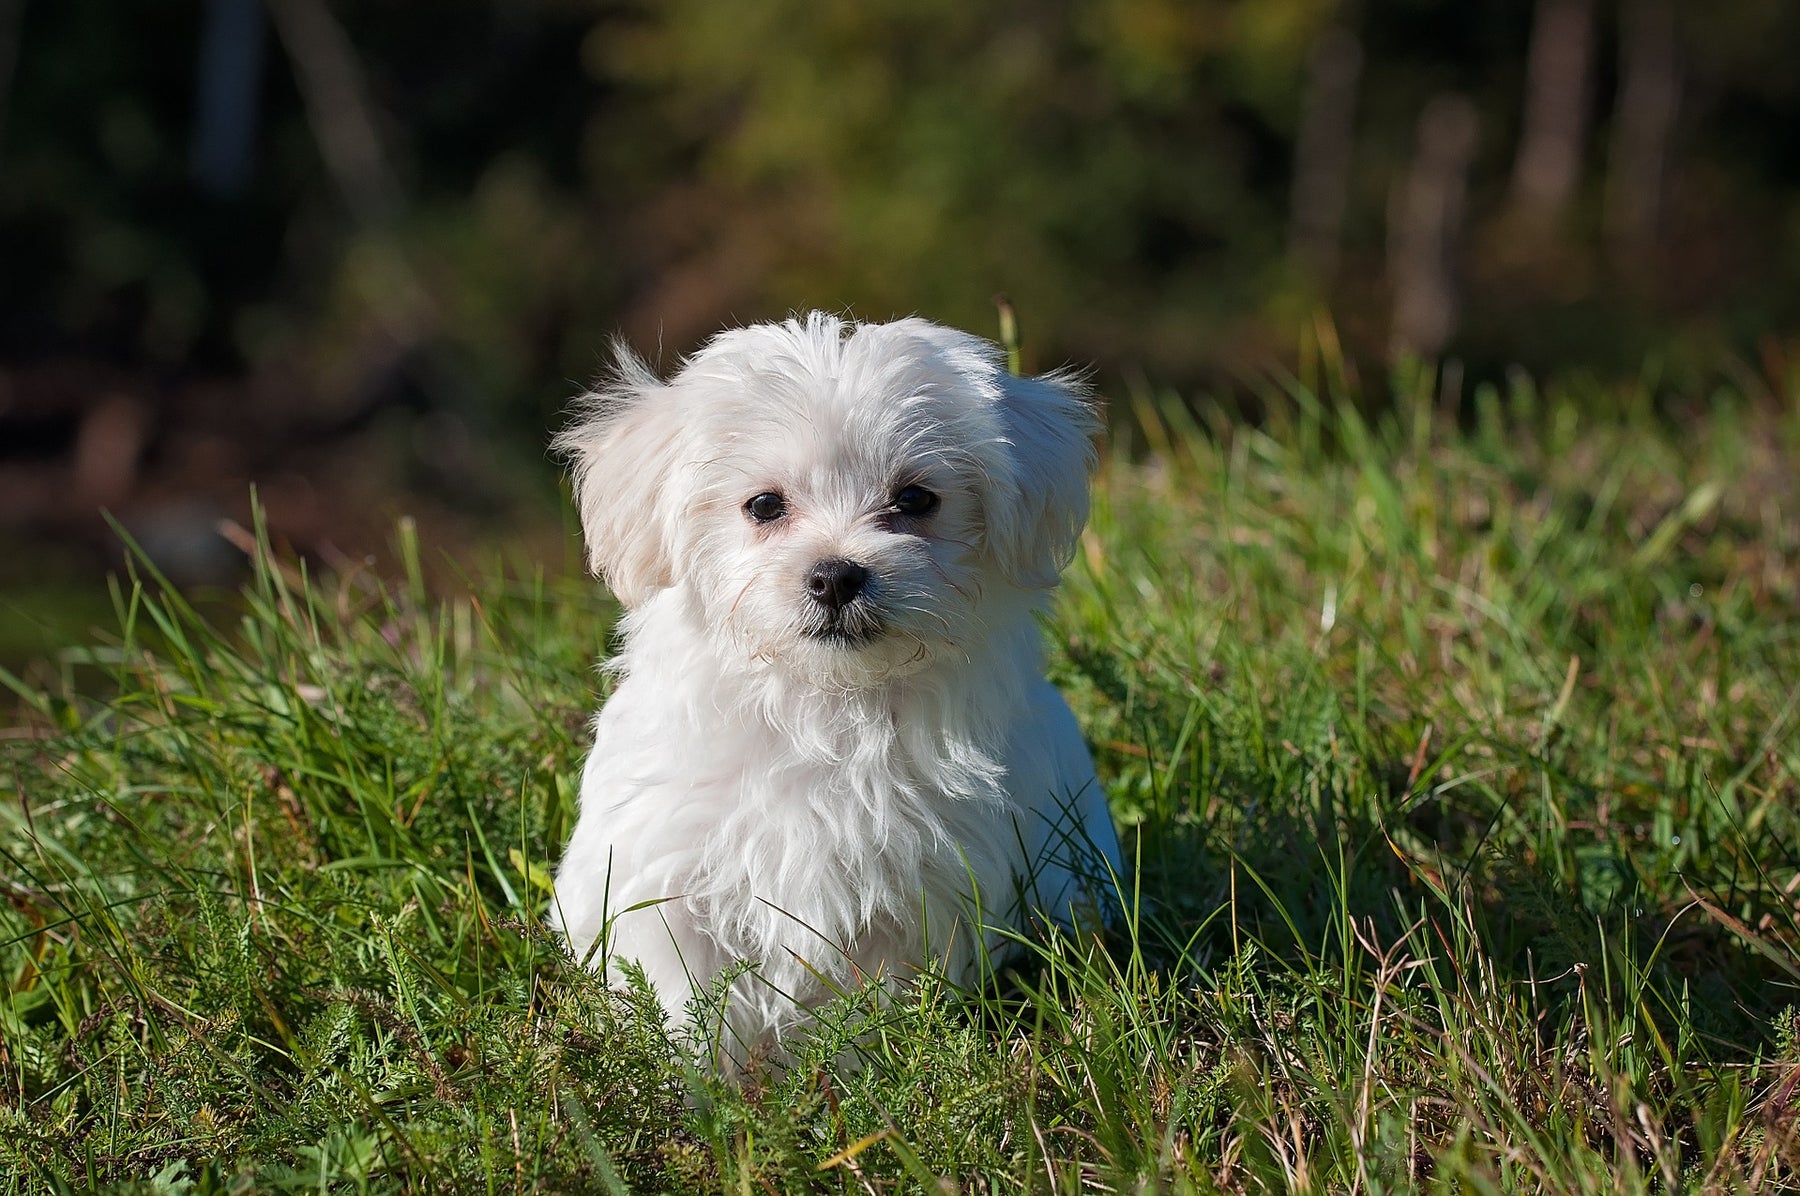 White dog outside in grass